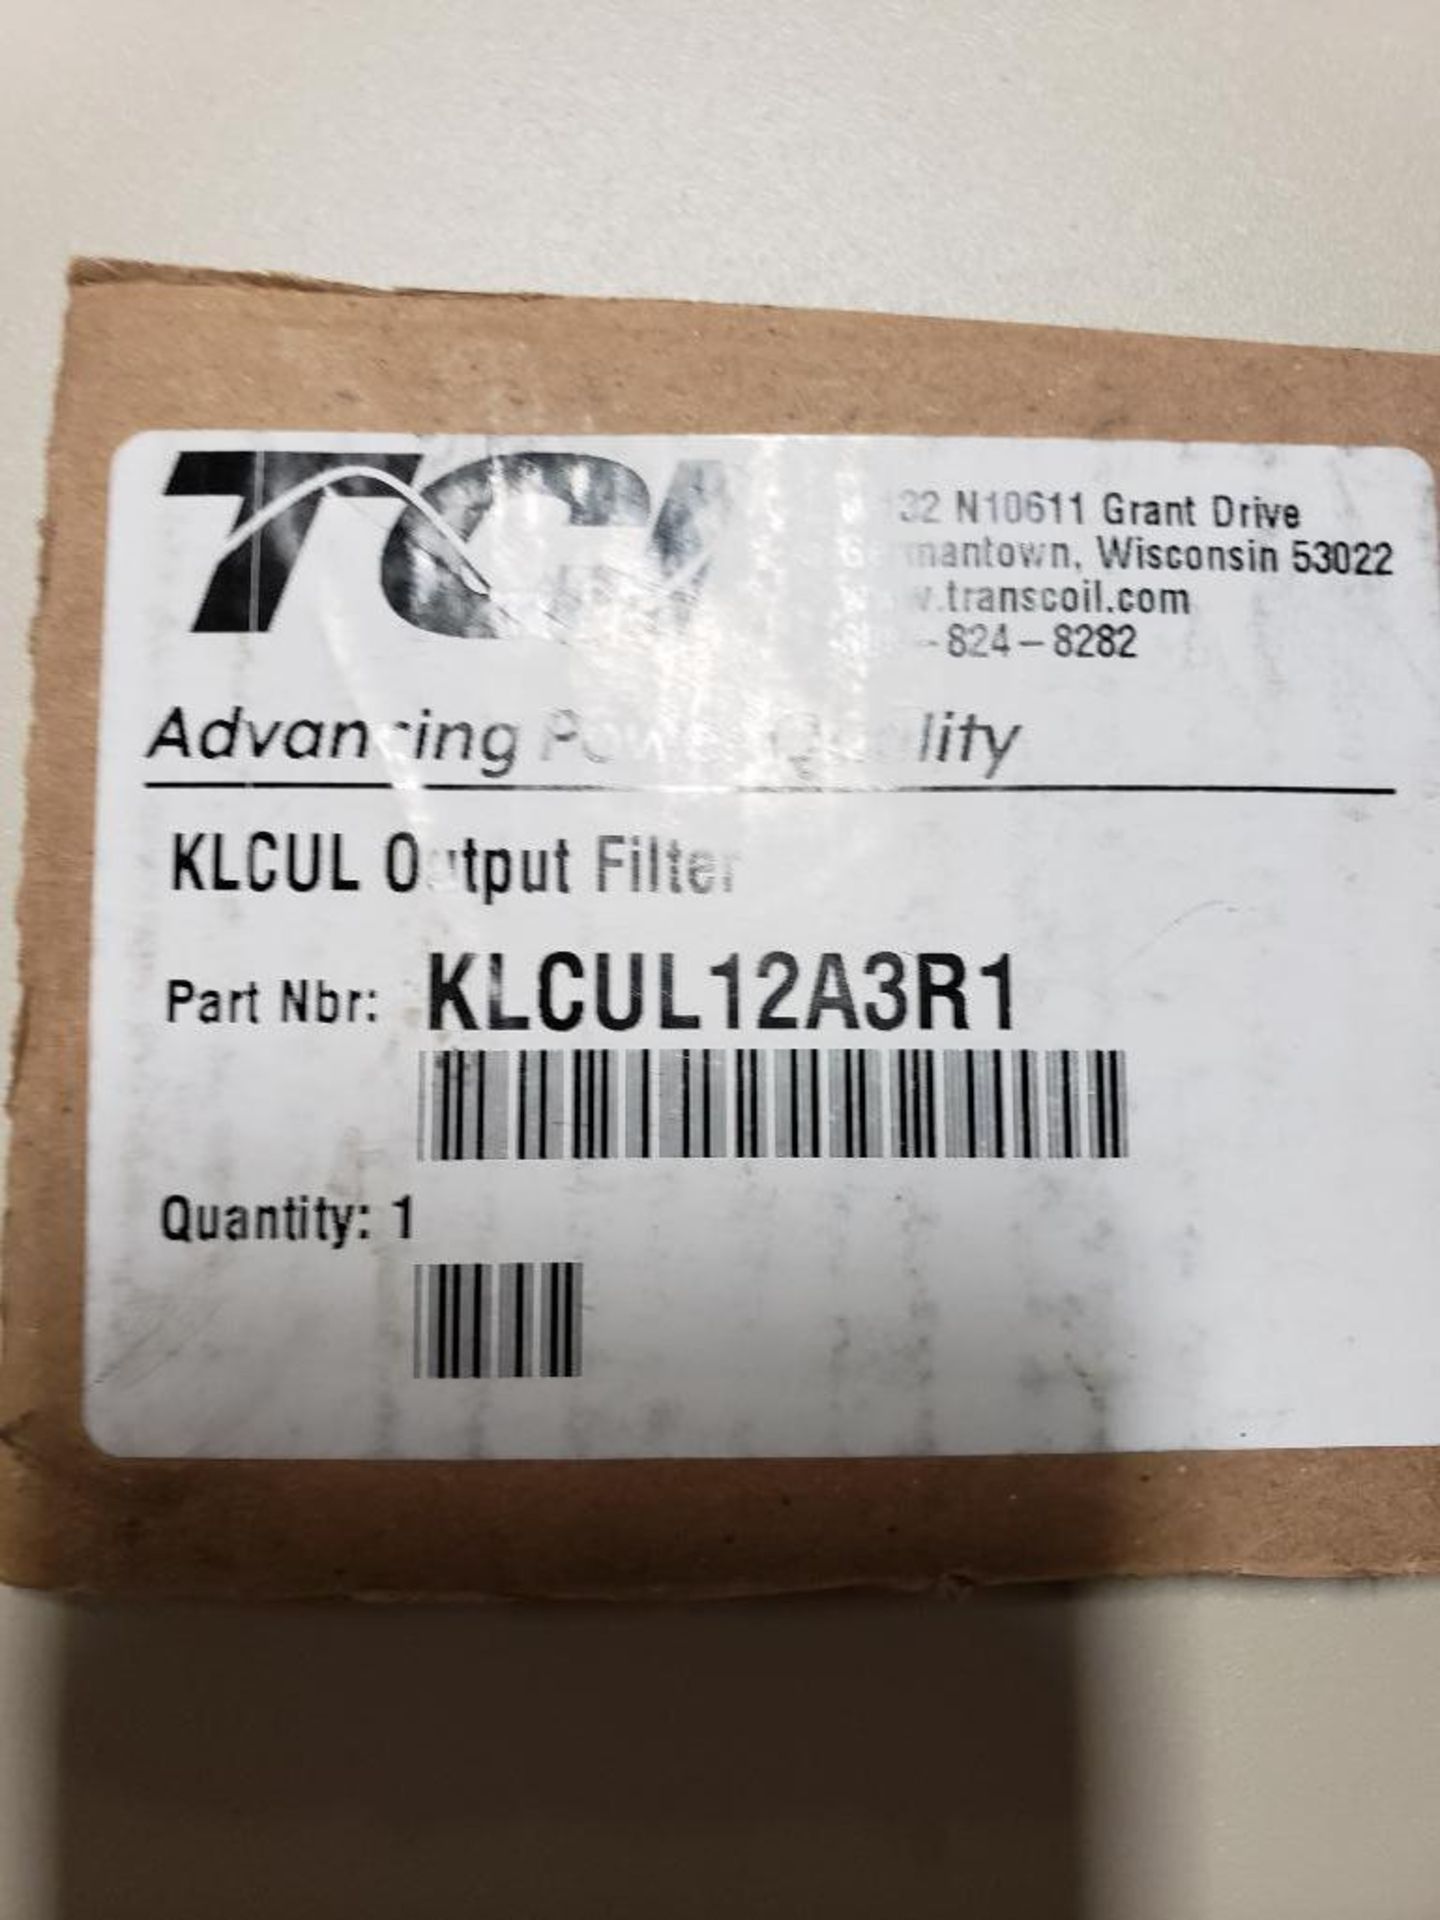 TCI output filter part number KLCUL12A3R1. New as pictured. - Image 2 of 5